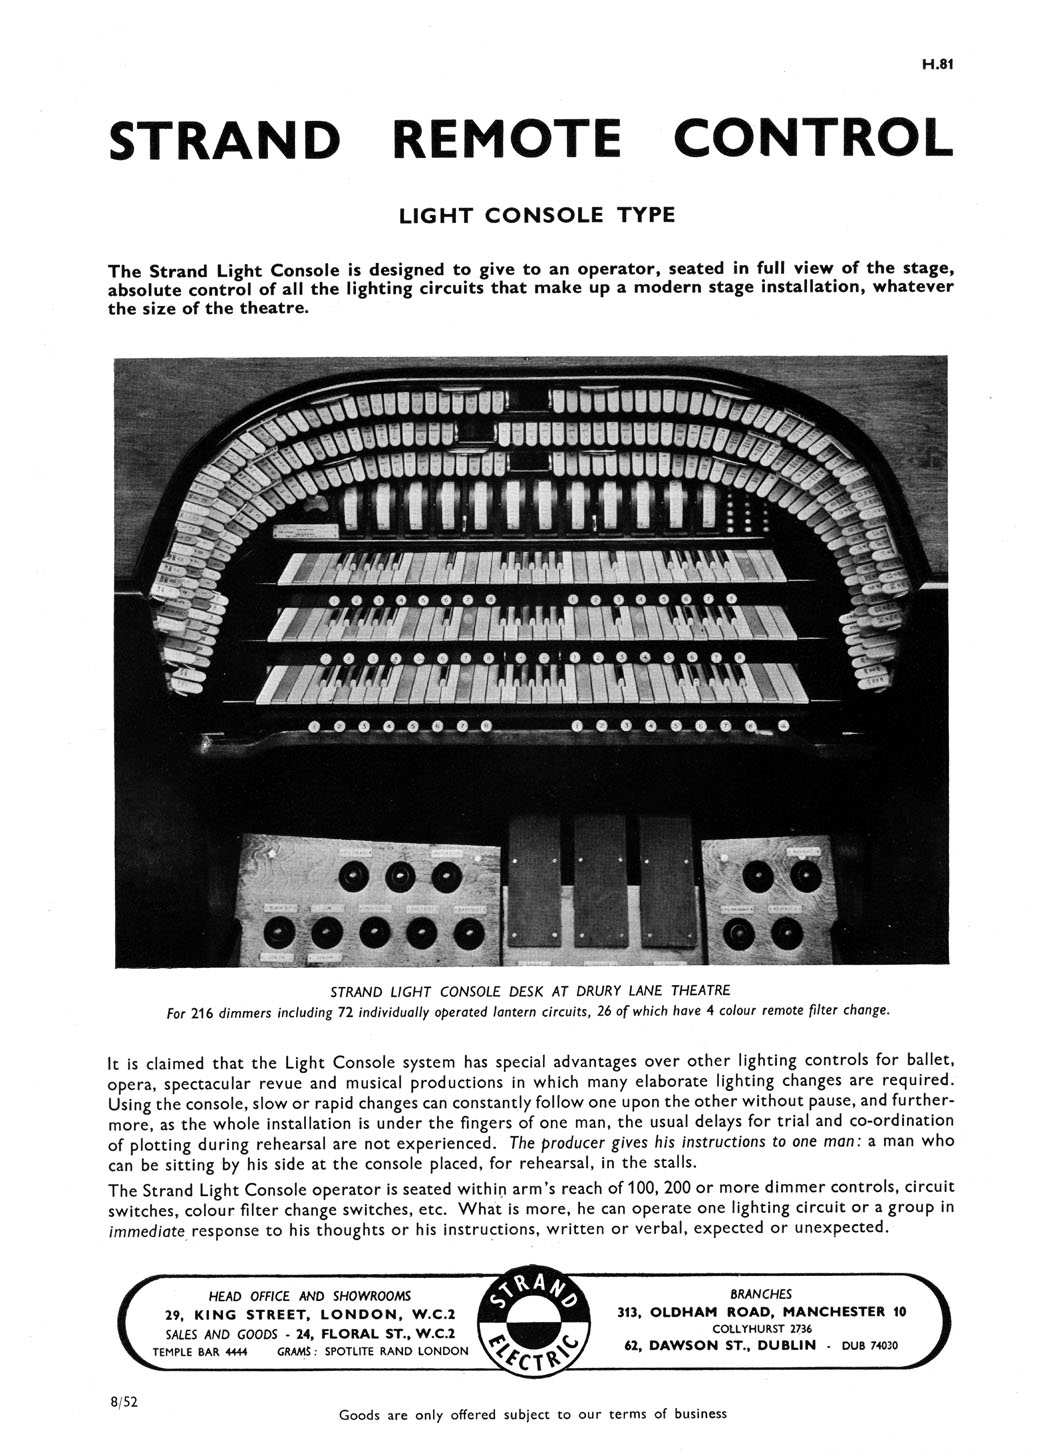 Strand publicity material showing the Drury Lane light console